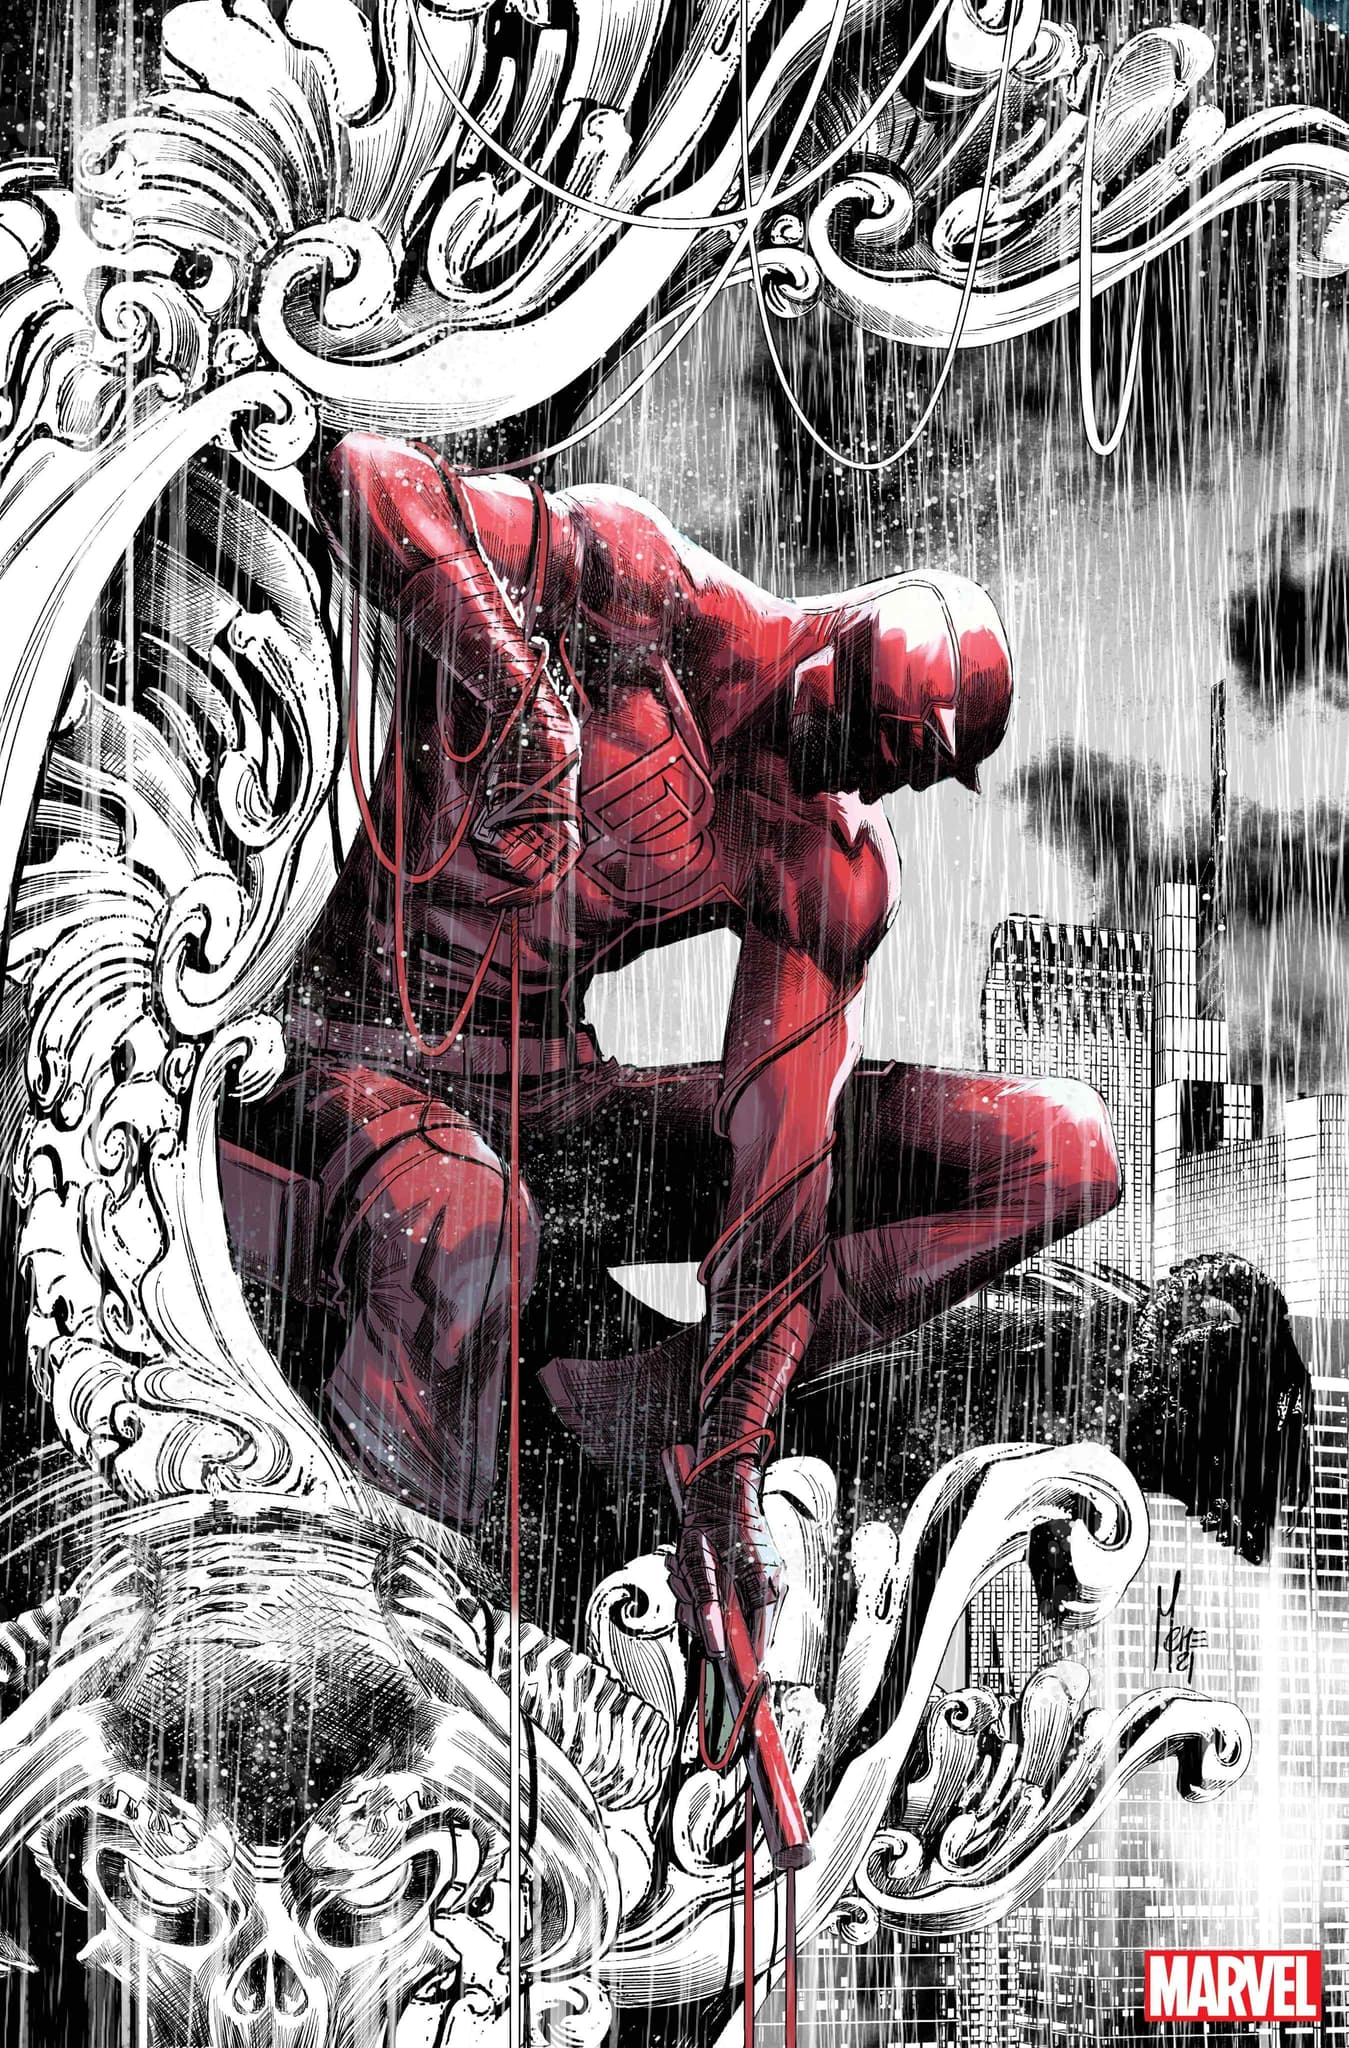 DAREDEVIL #1 SDCC exclusive variant cover by Marco Checchetto and Matthew Wilson